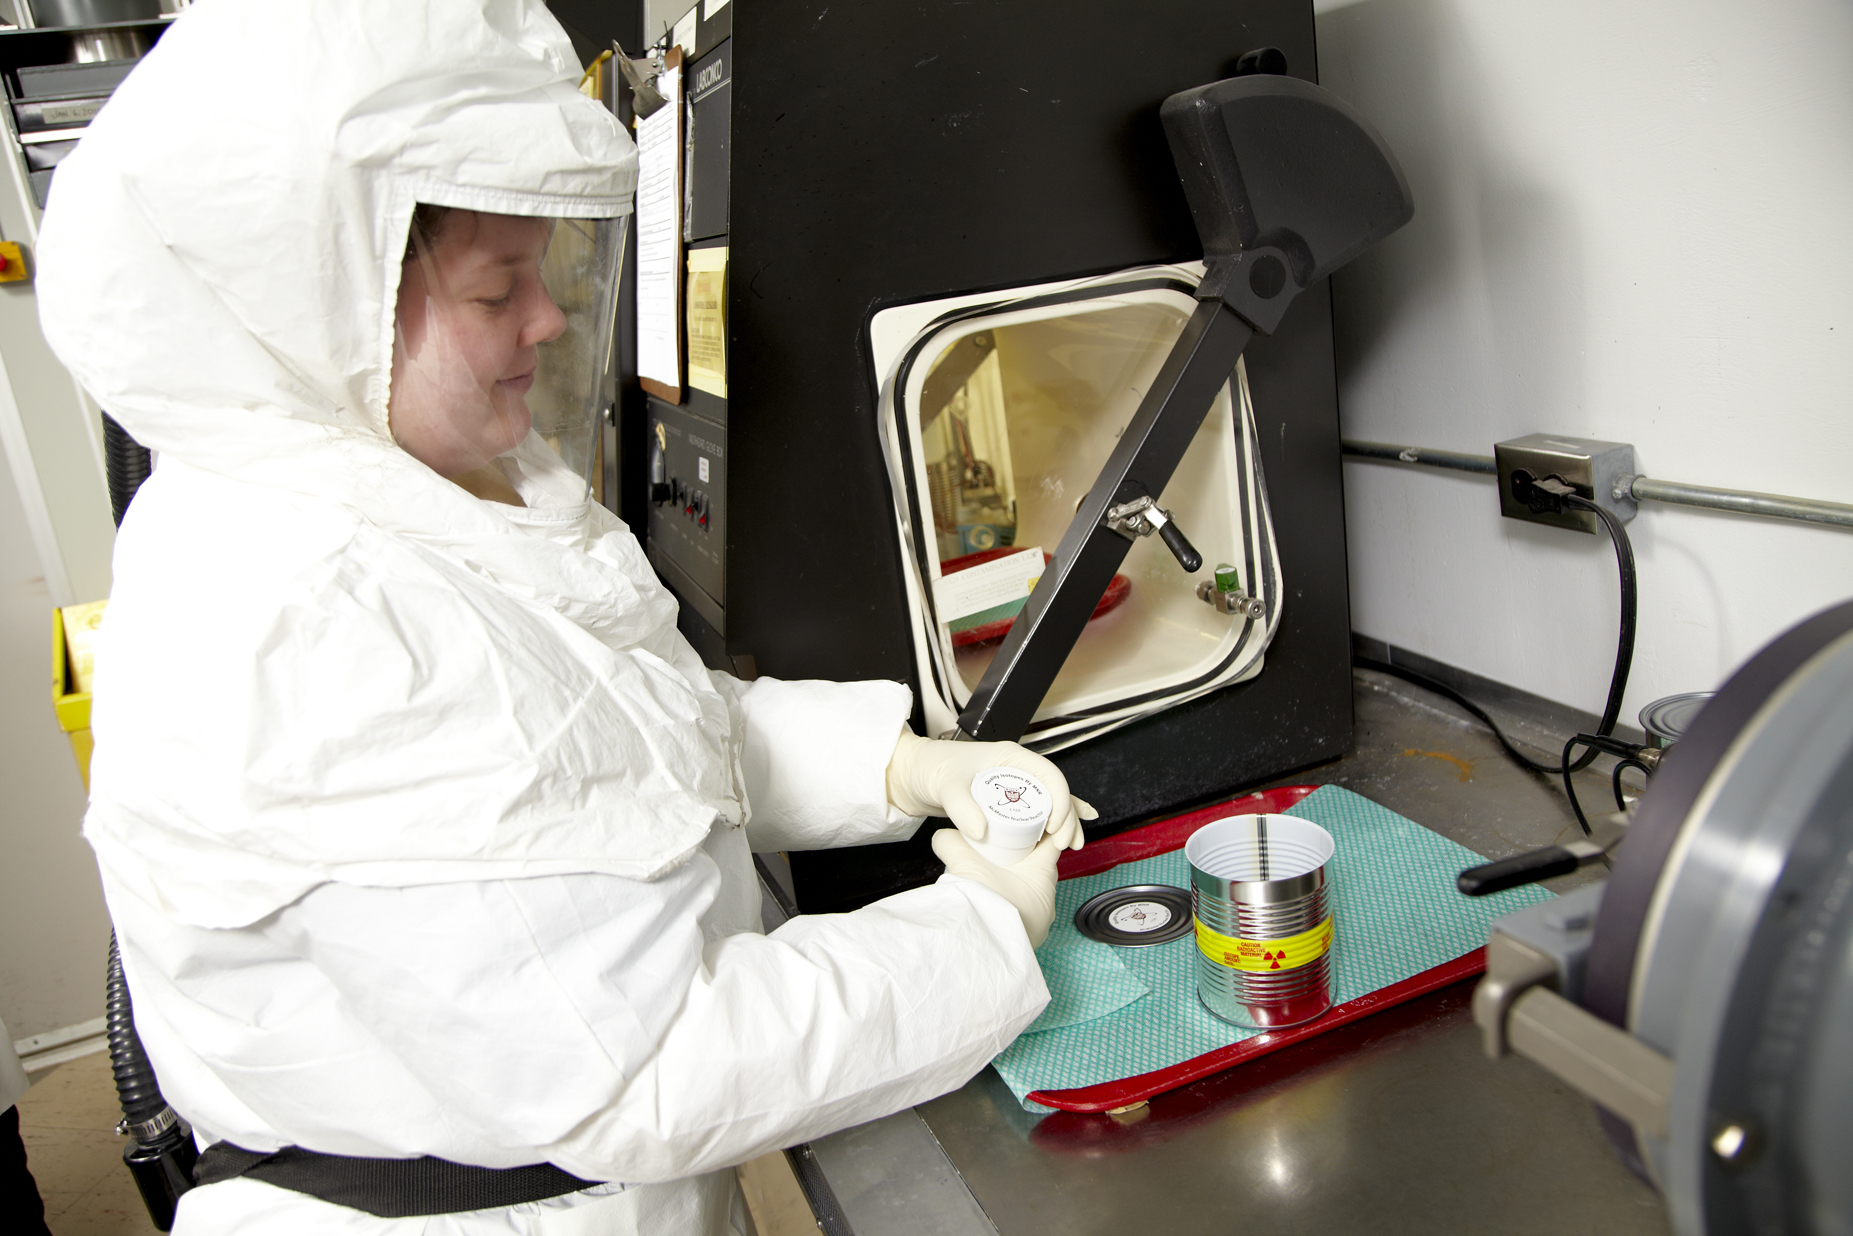 A technician wearing PPE preparing a medical isotope.